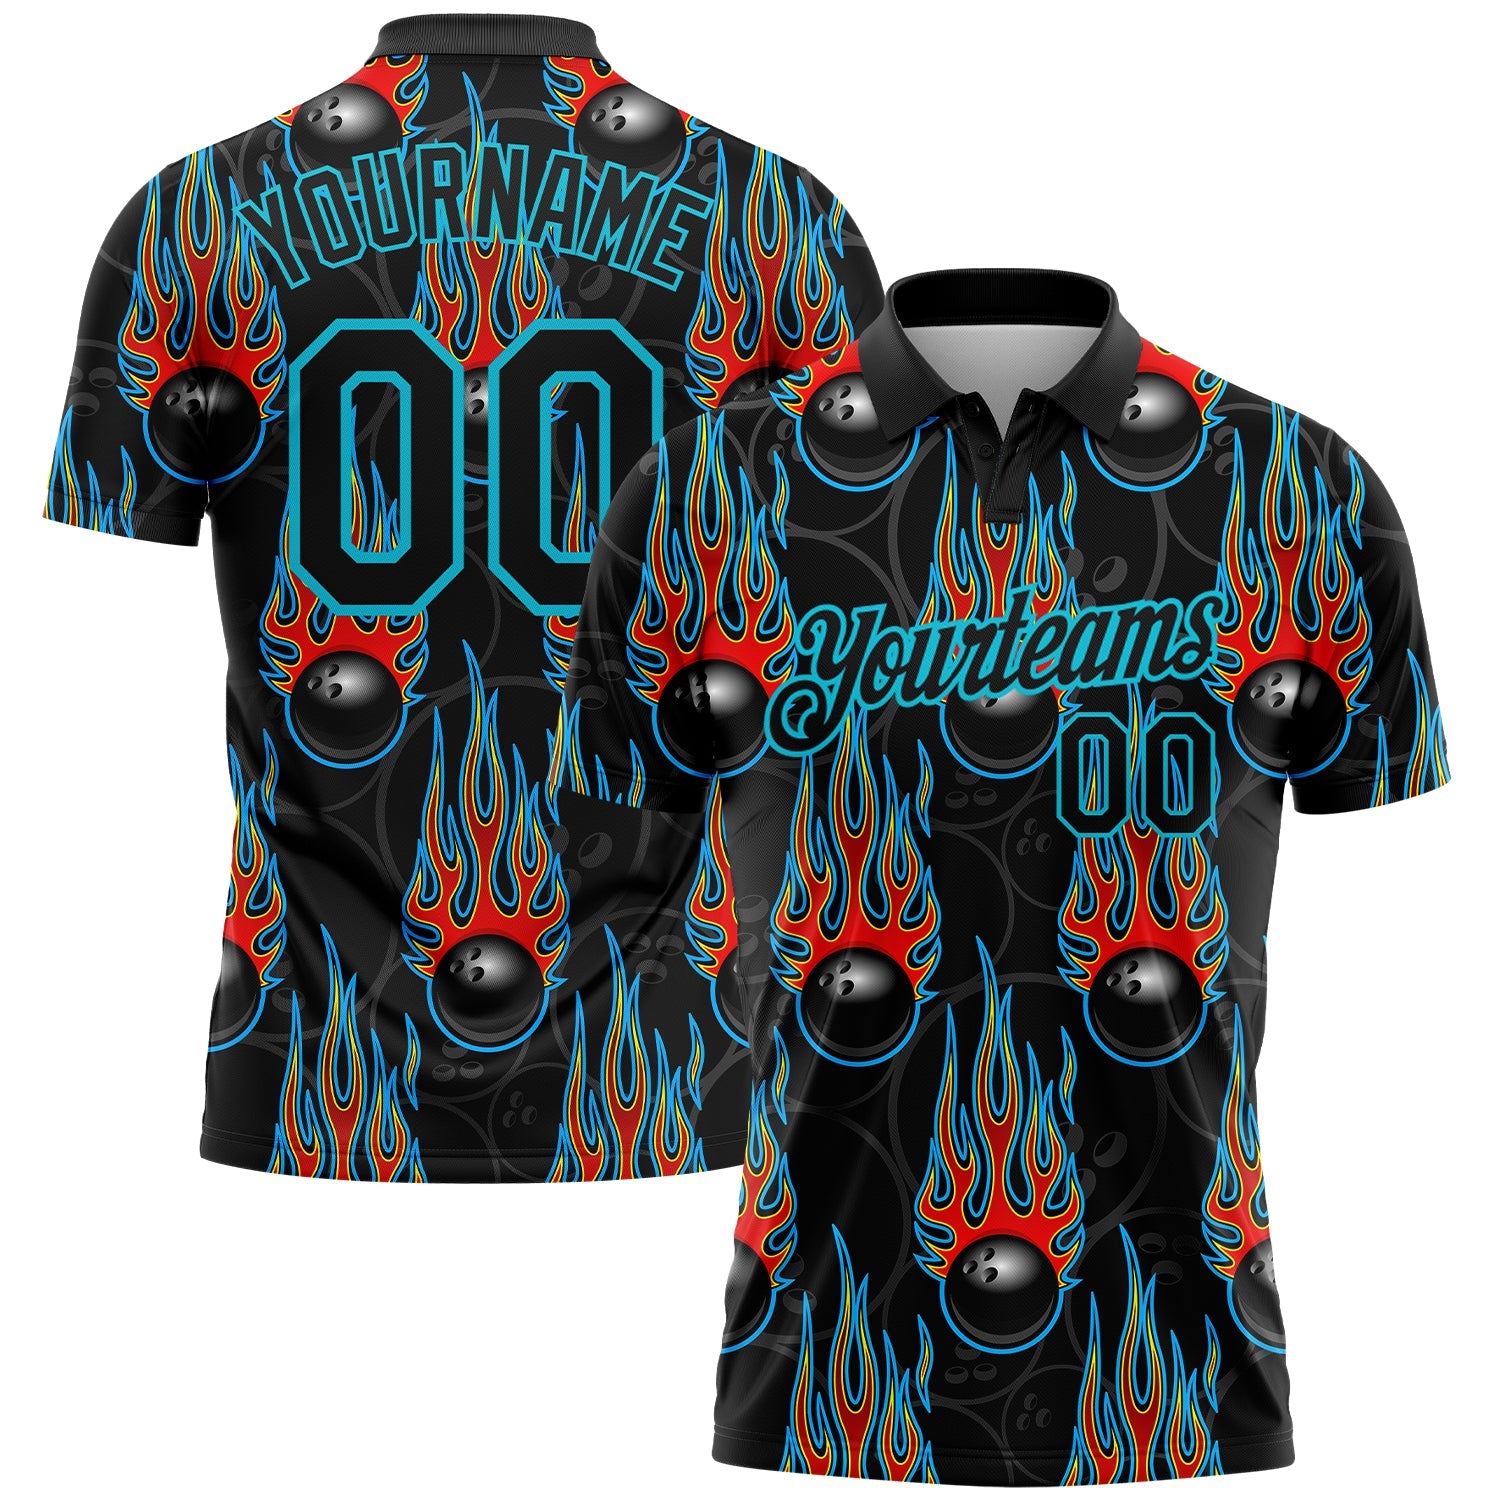 Kundenspezifisches Black Lakes Blue 3D-Muster-Design-Bowlingball mit Hotrod Flame Performance Golf-Poloshirt